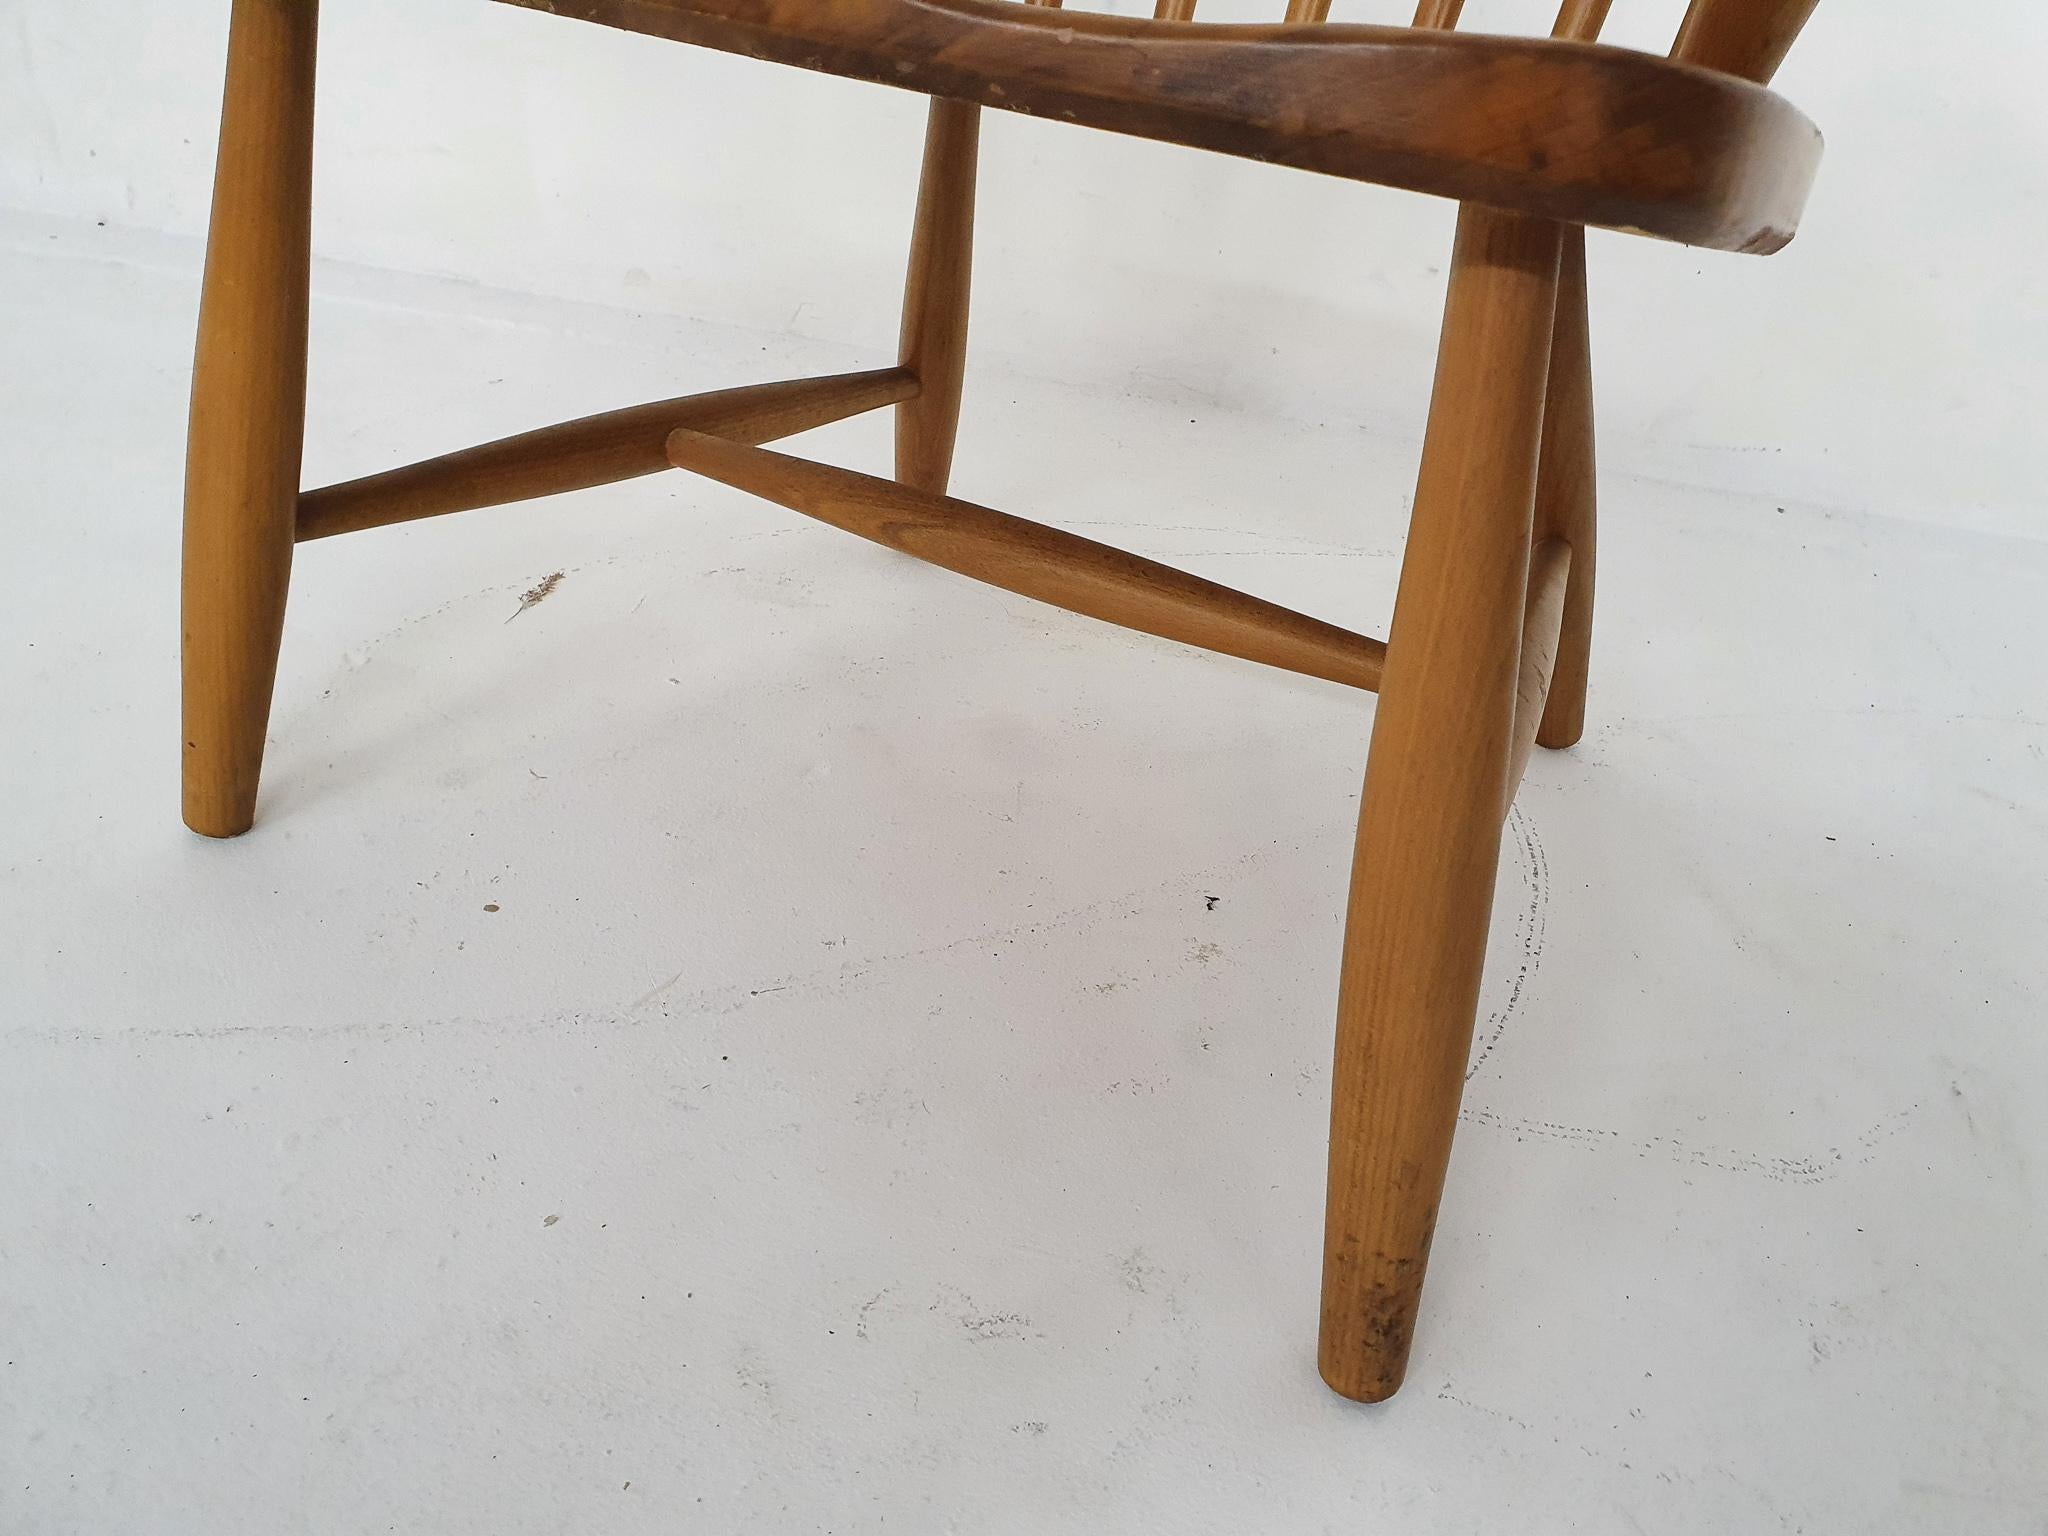 Wood Mid-Century Modern Spindle Back Arm Chair, by Gelderland, the Netherlands 1960's For Sale